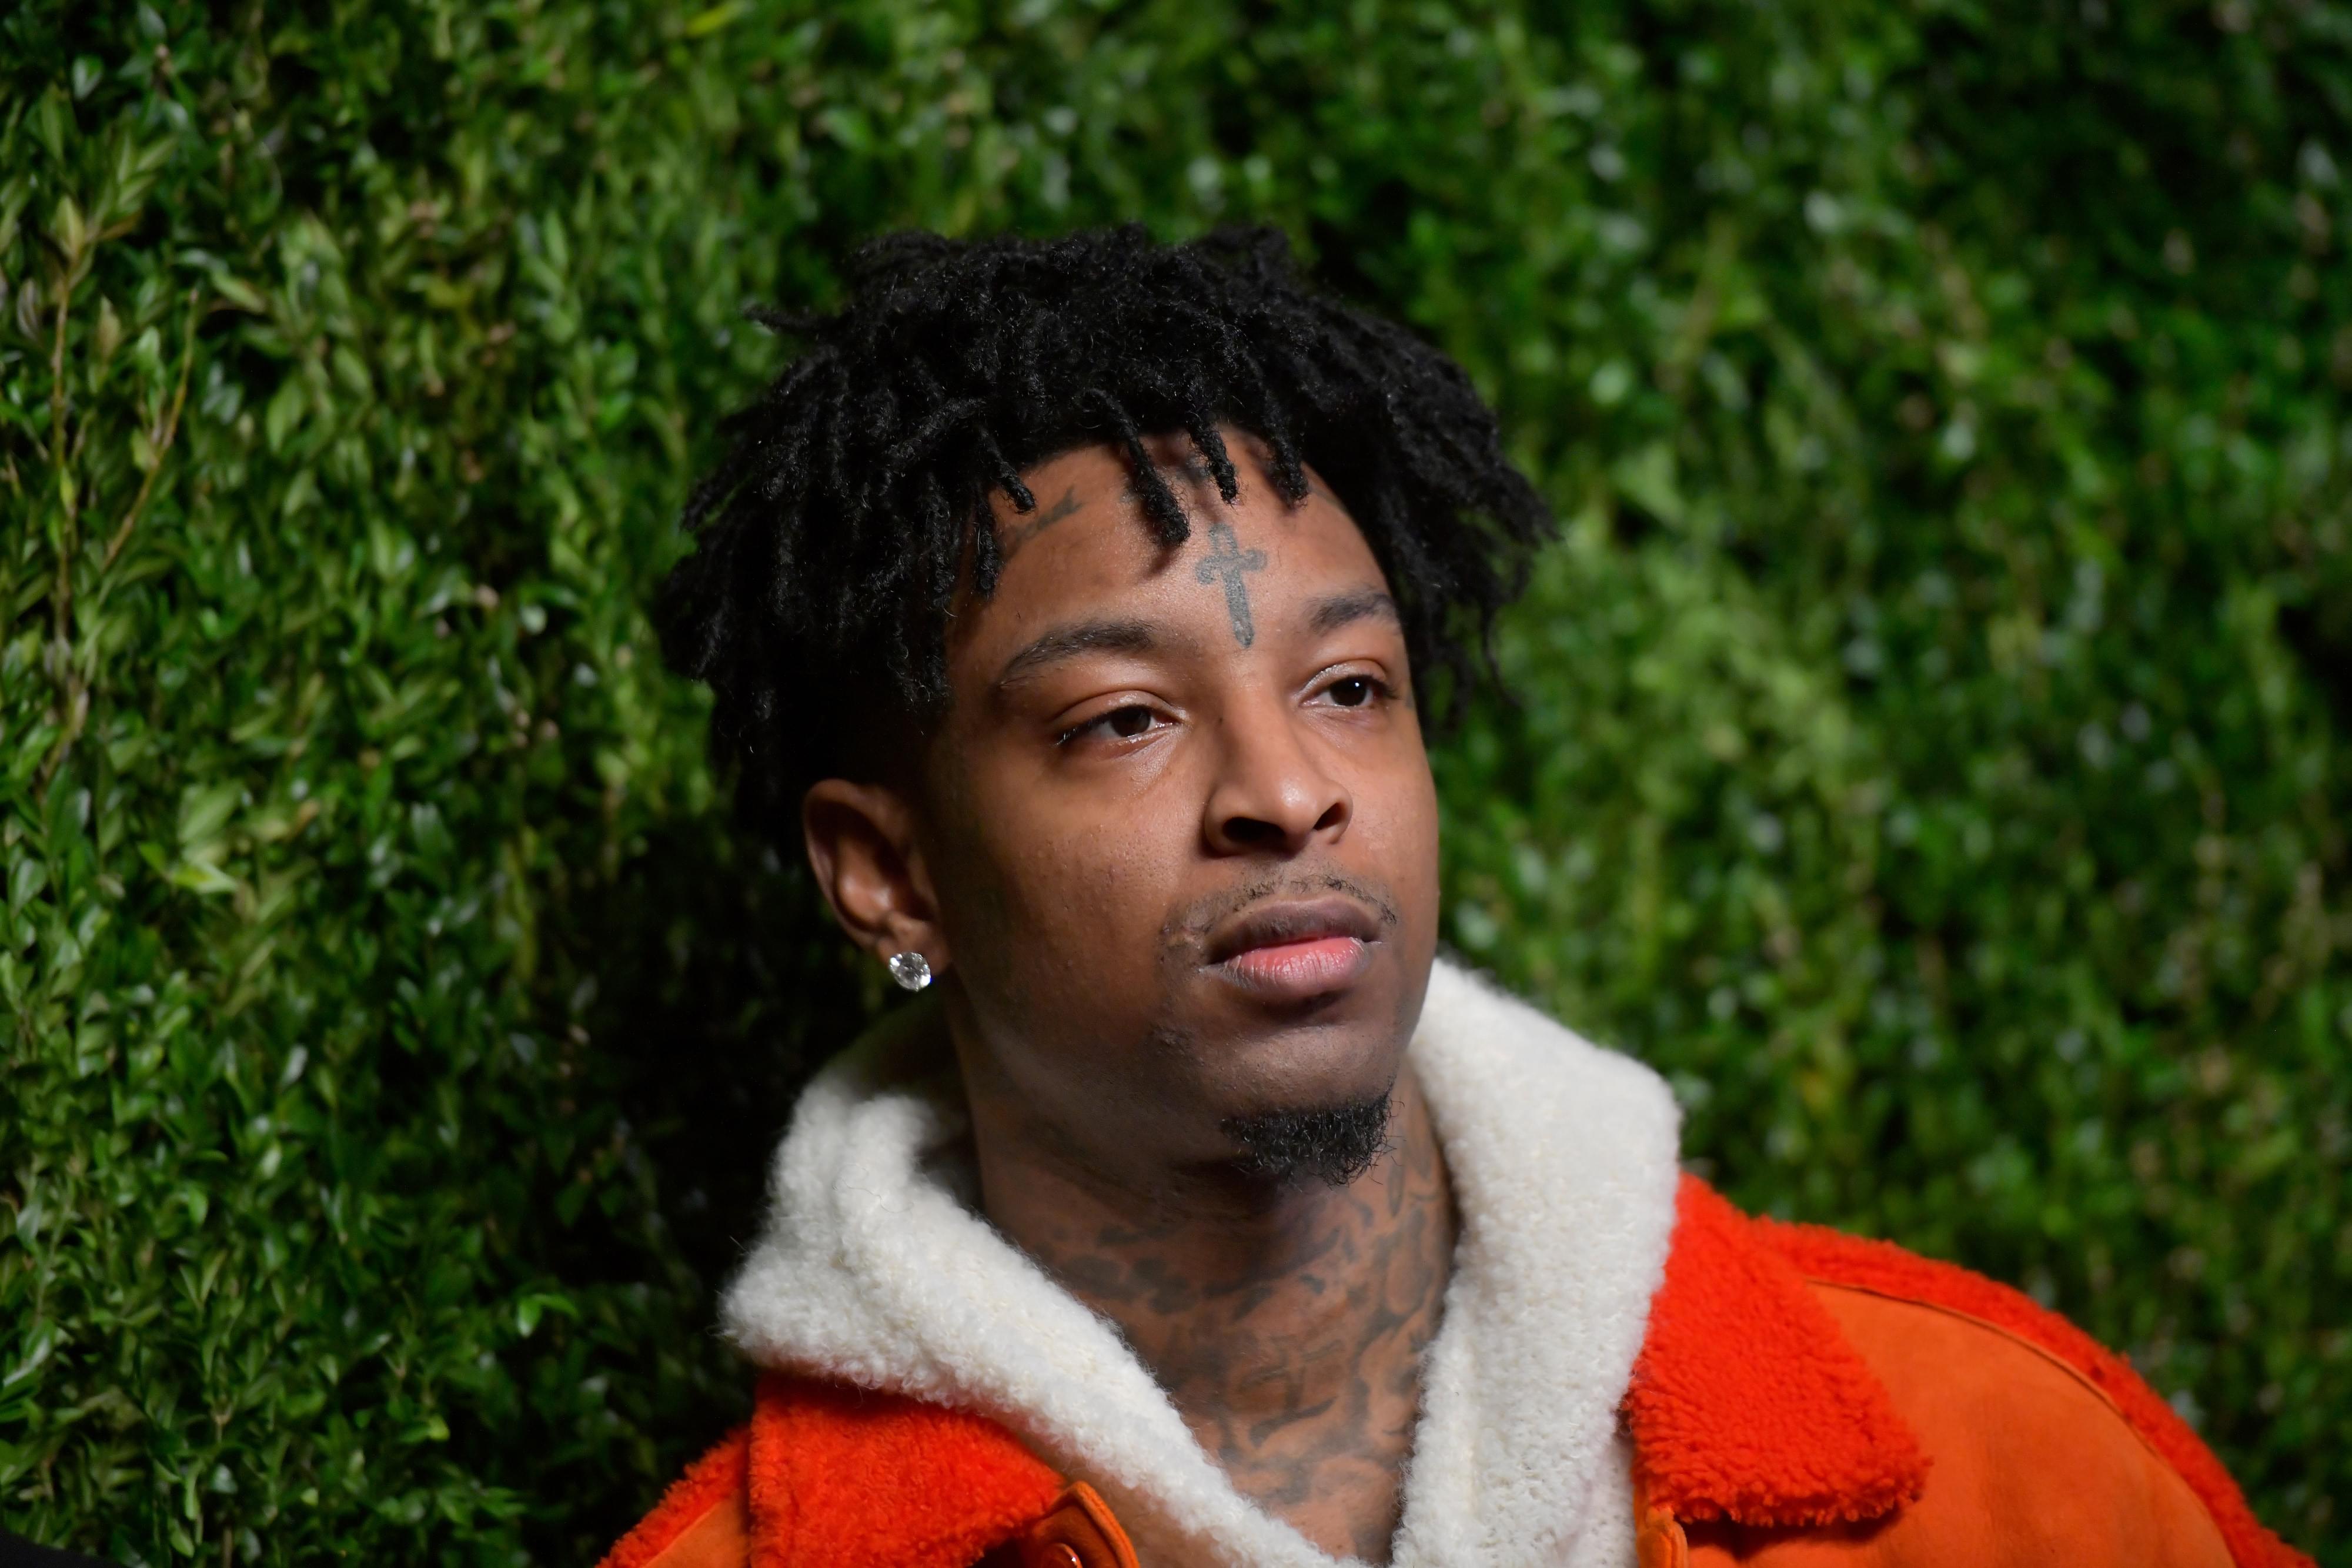 21 Savage Helps Out Kids WIth Back To School Drive